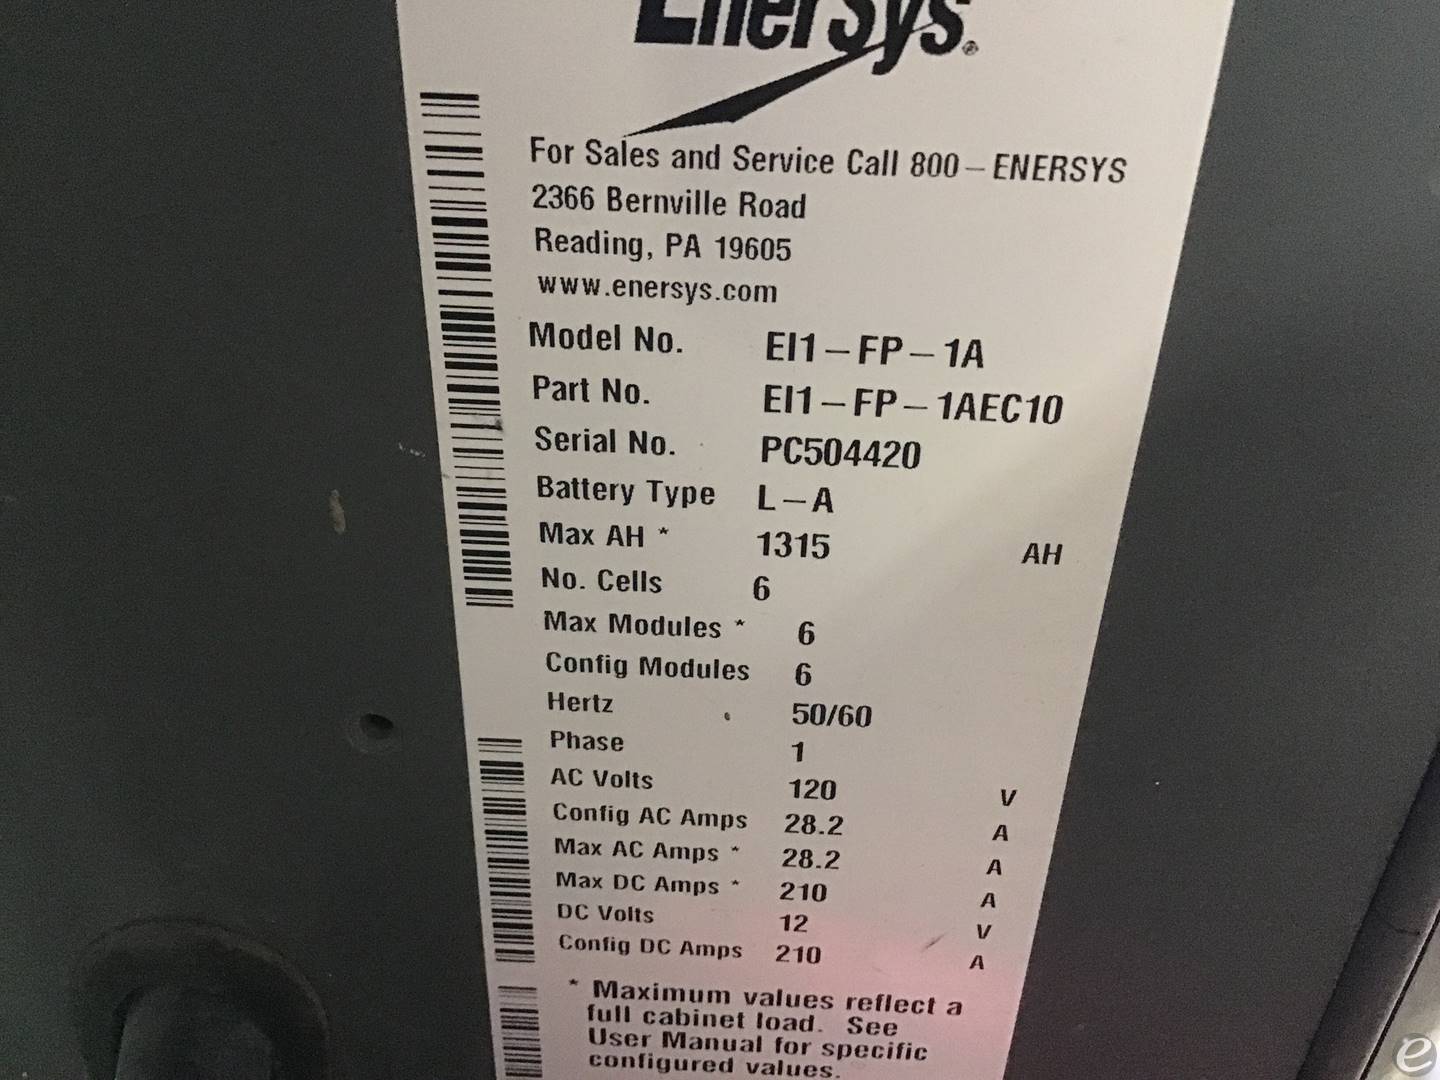 Enersys EI1-FP-1A